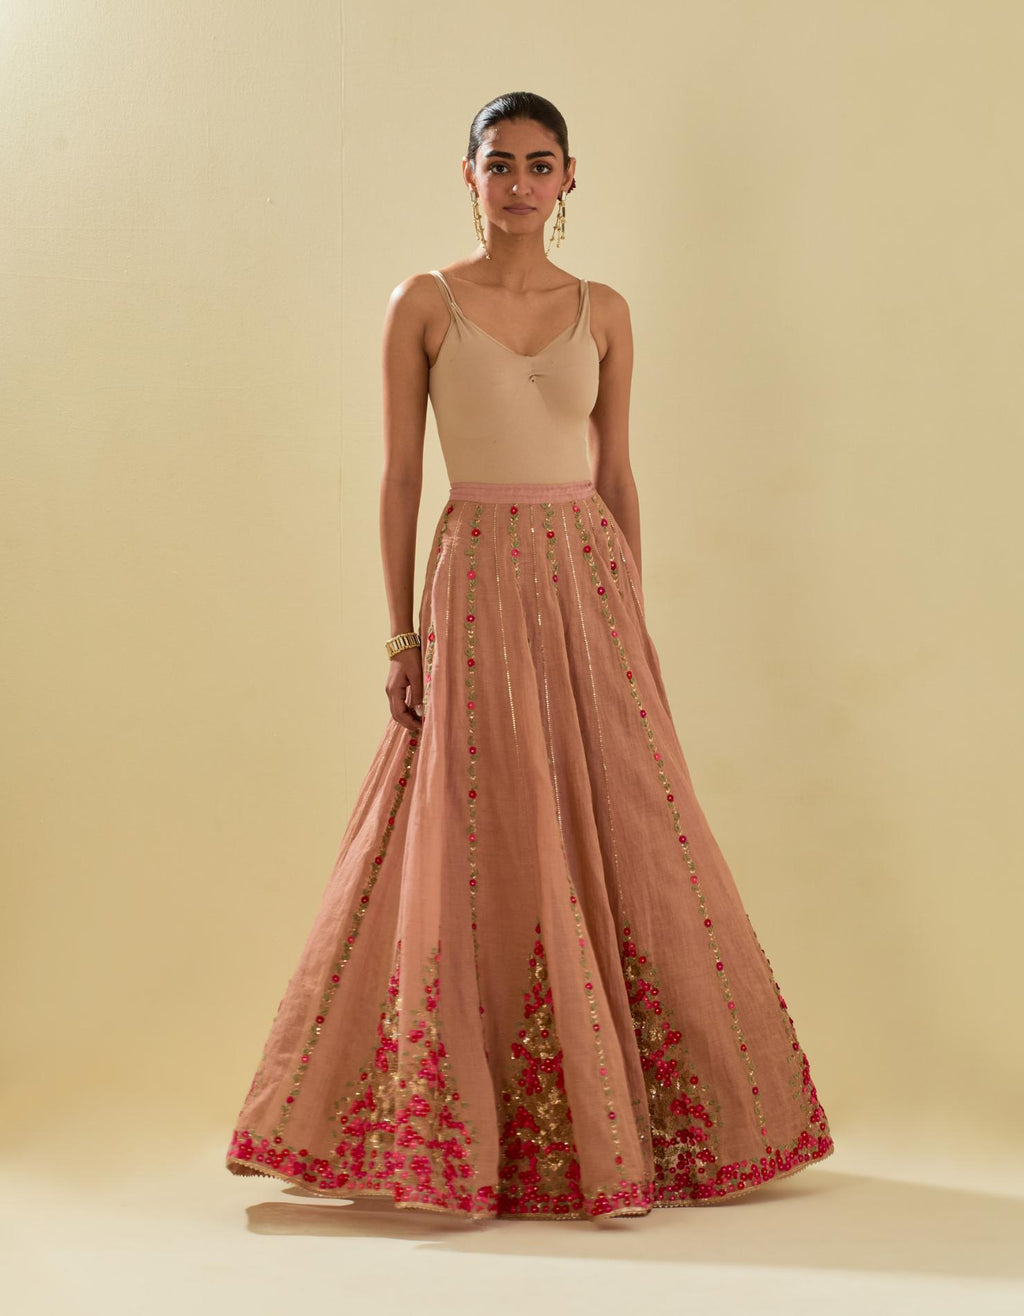 Pink tissue chanderi short top set with delicate hand cut silk flower embroidery, highlighted with gold sequins and beads.